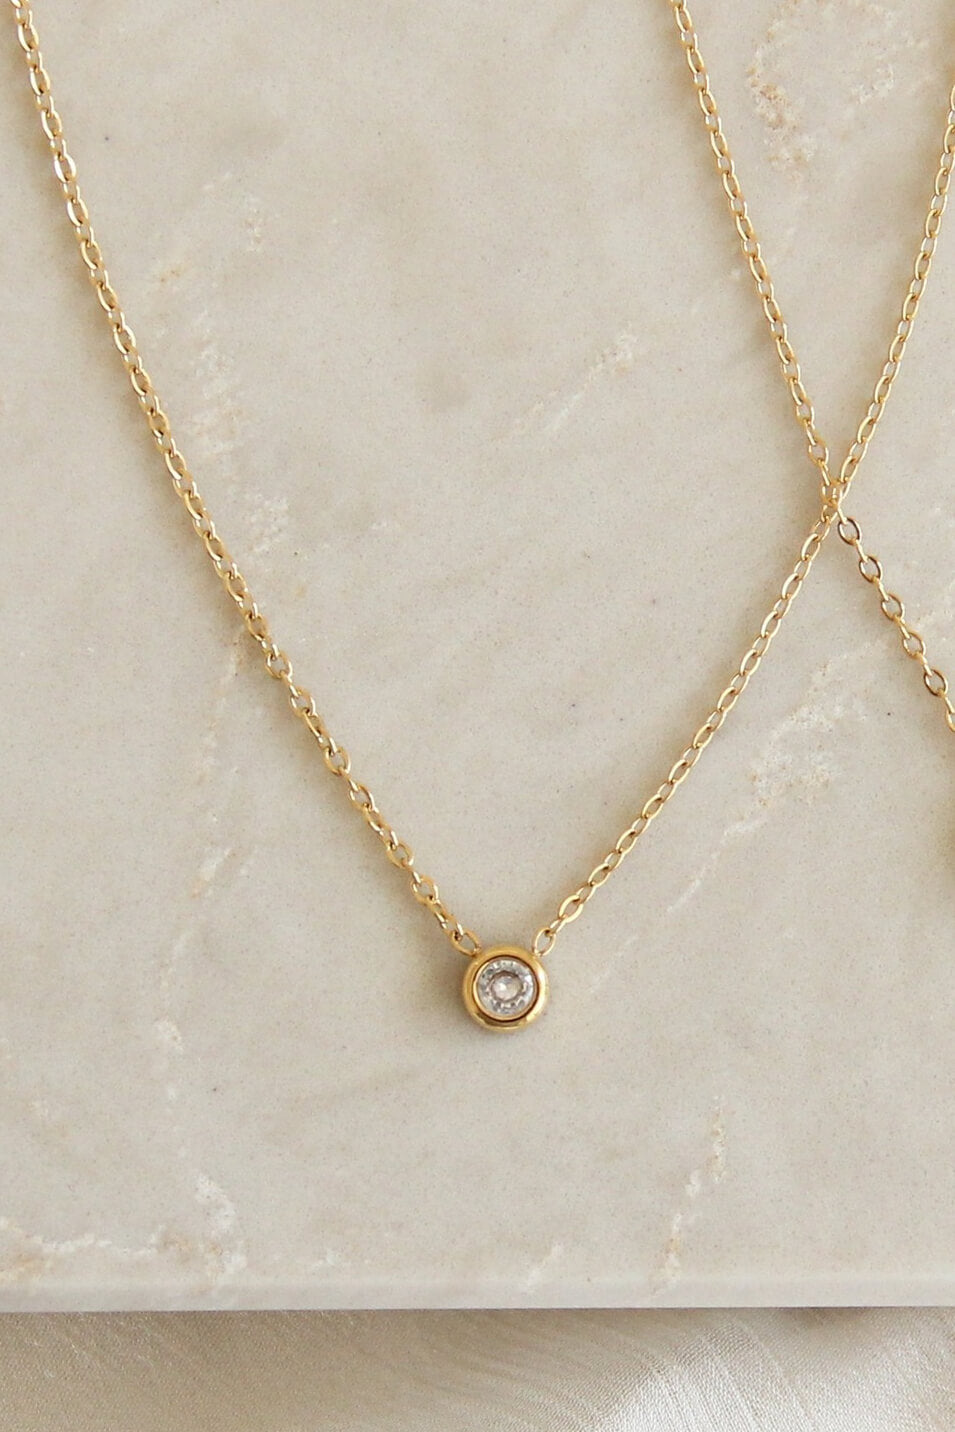 Maive Jewelry CZ chain necklace in 18k gold